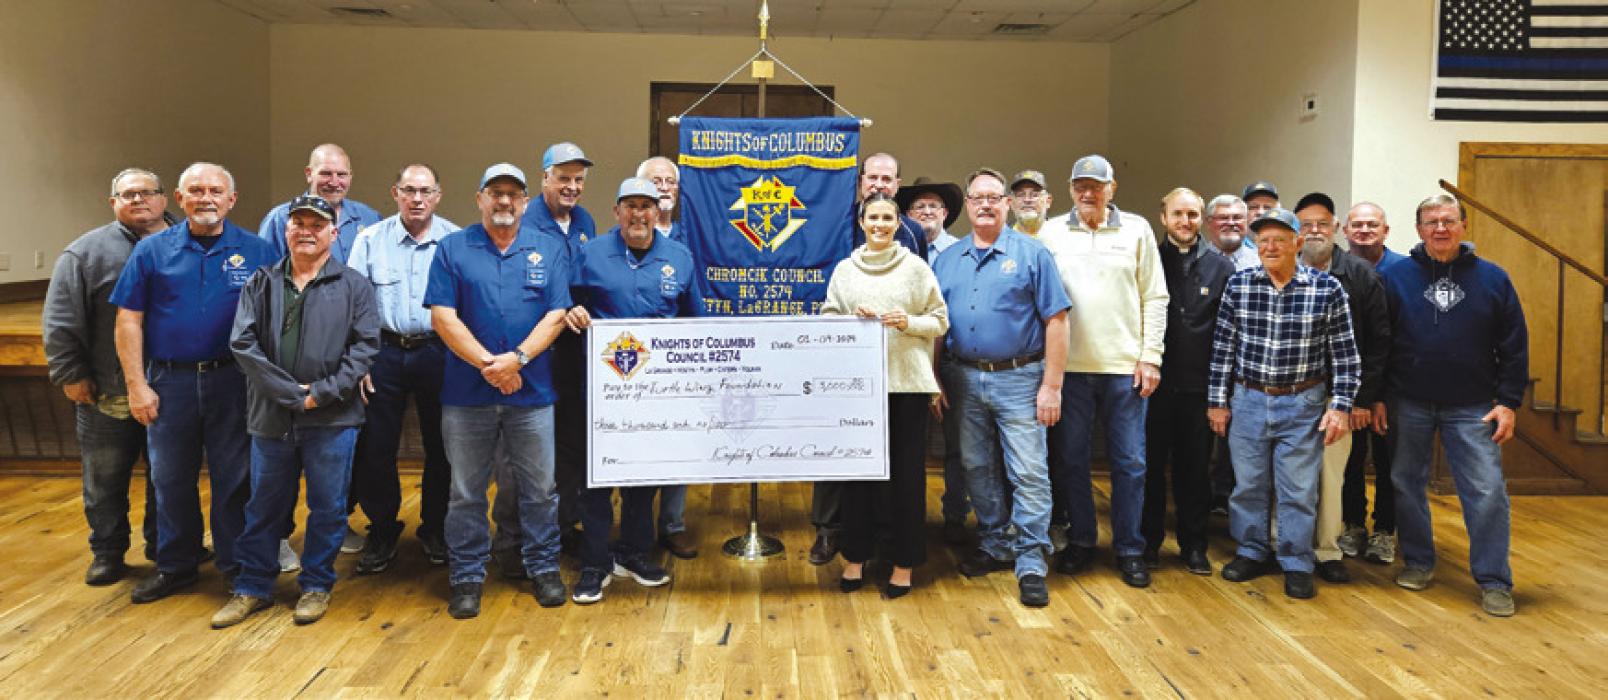 Knights of Columbus Donates to Turtle Wing